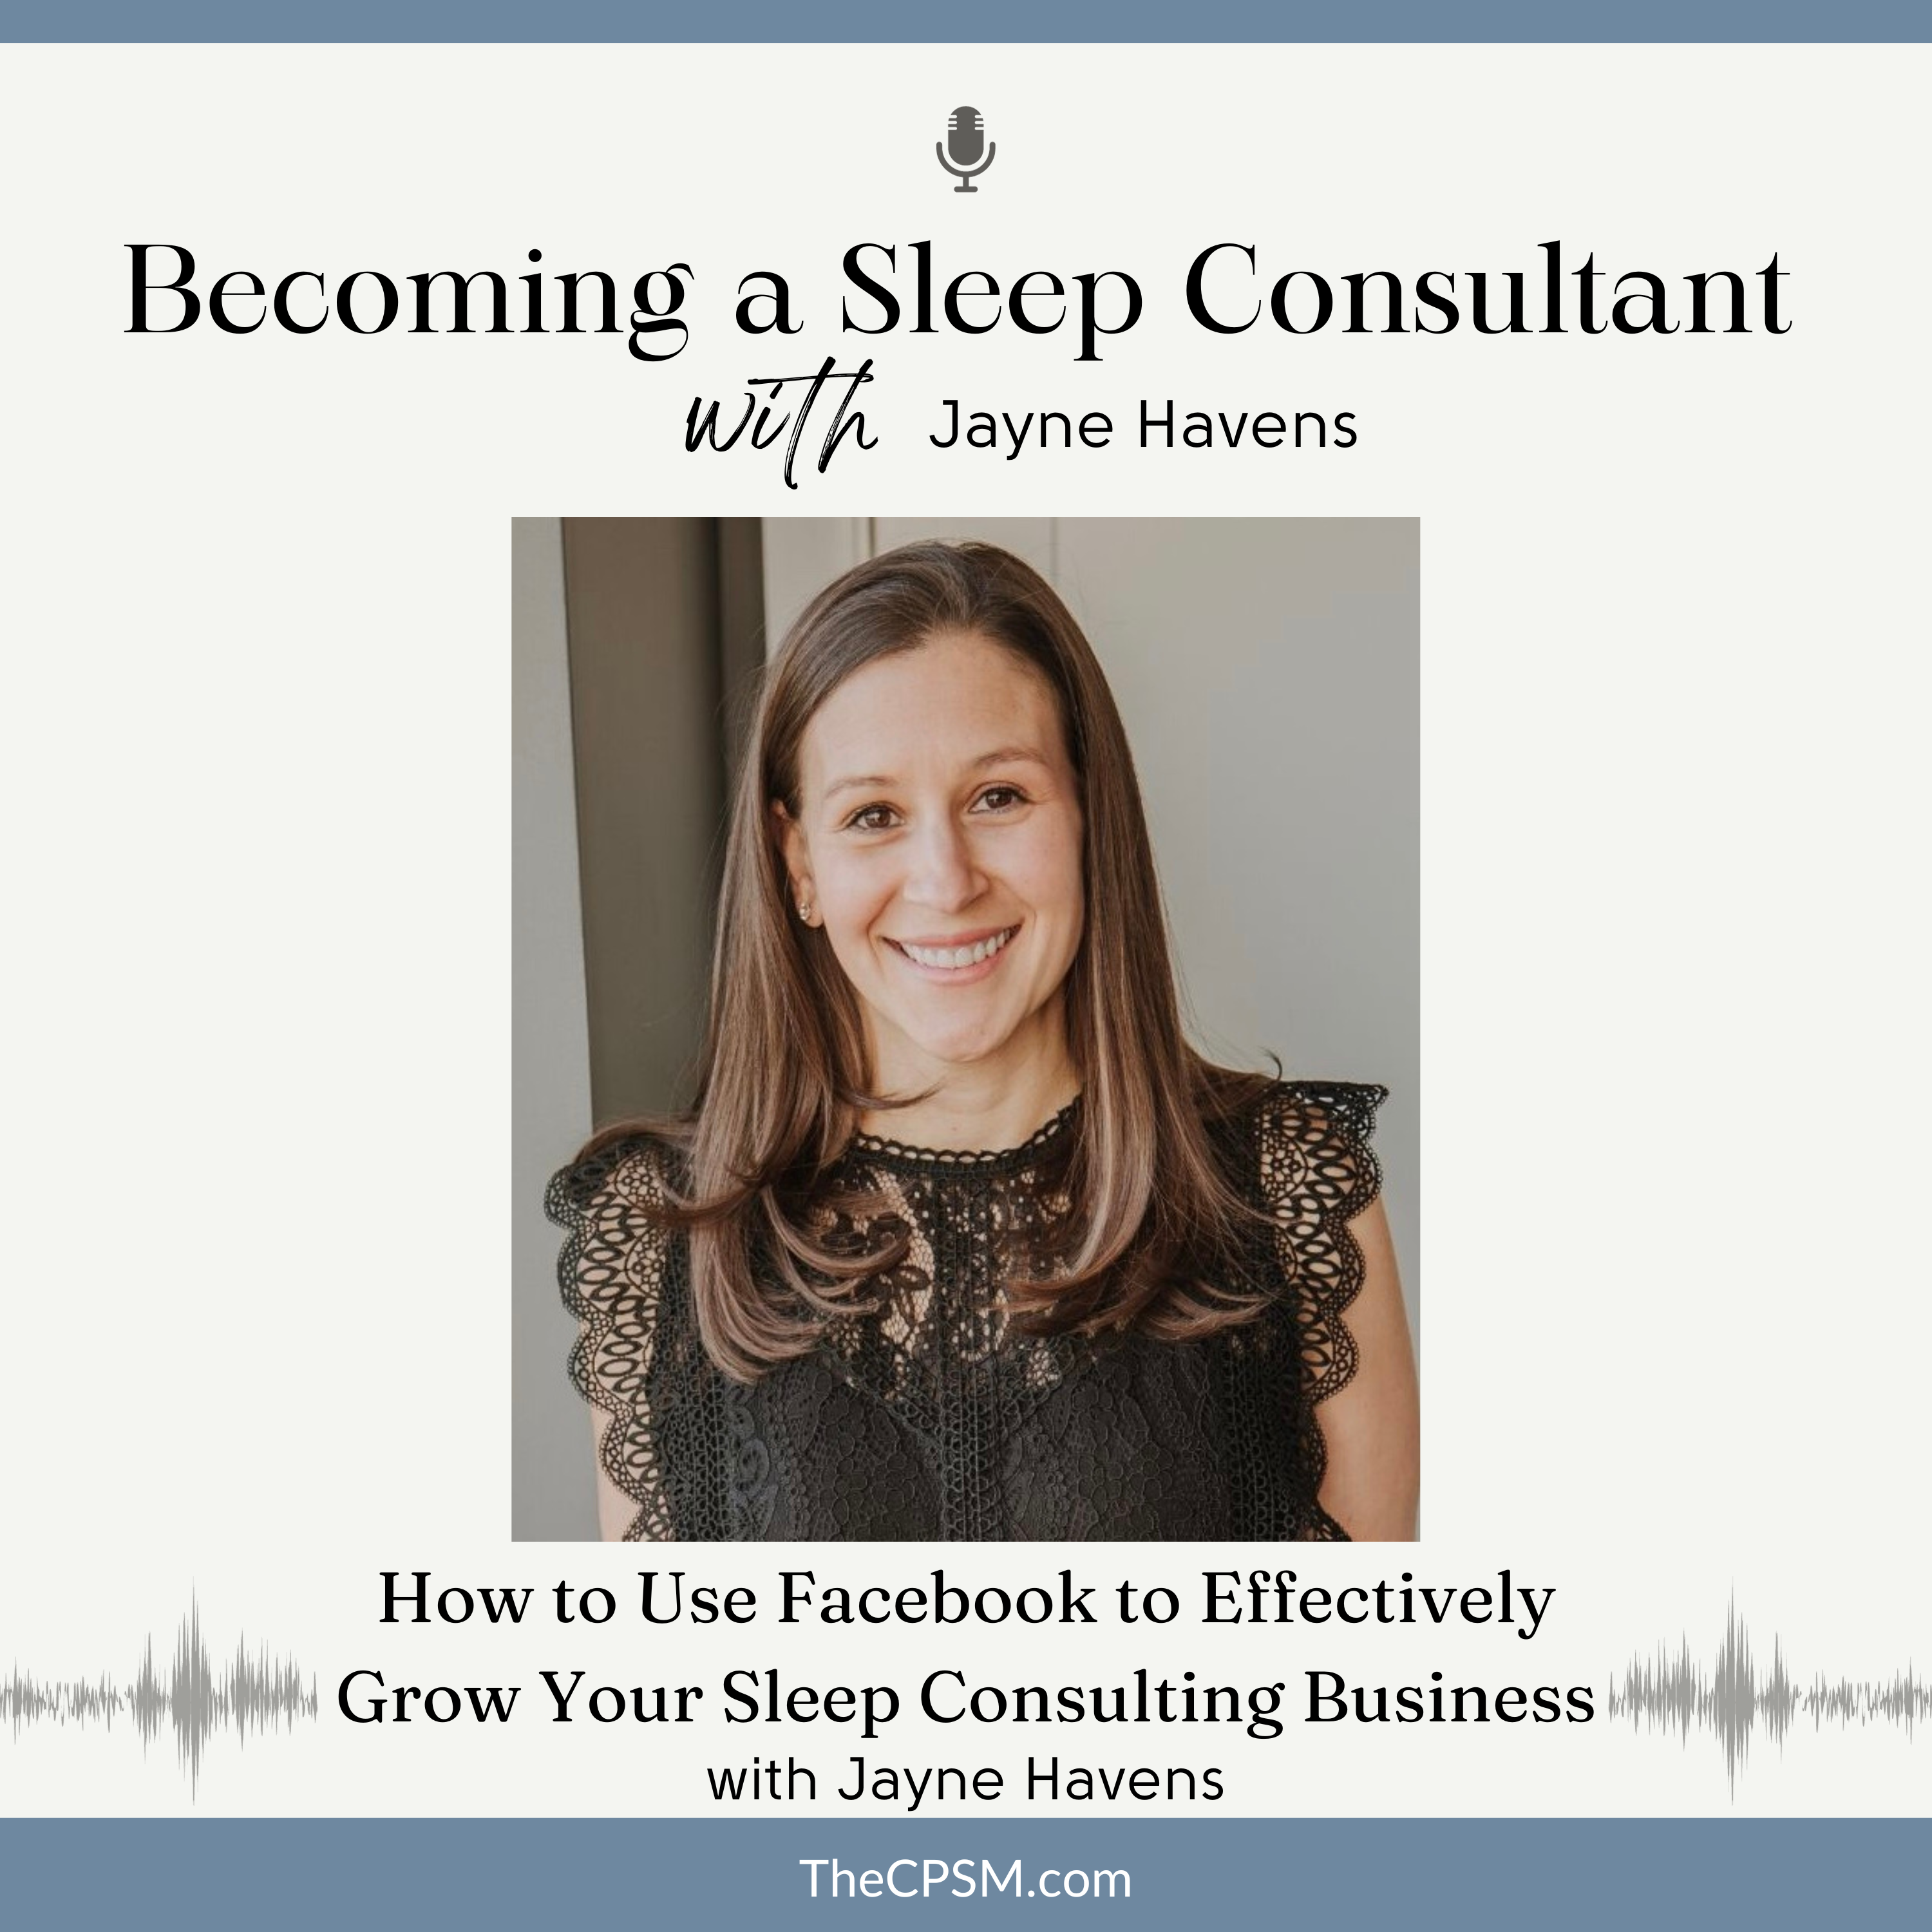 How to Use Facebook to Effectively Grow Your Sleep Consulting Business